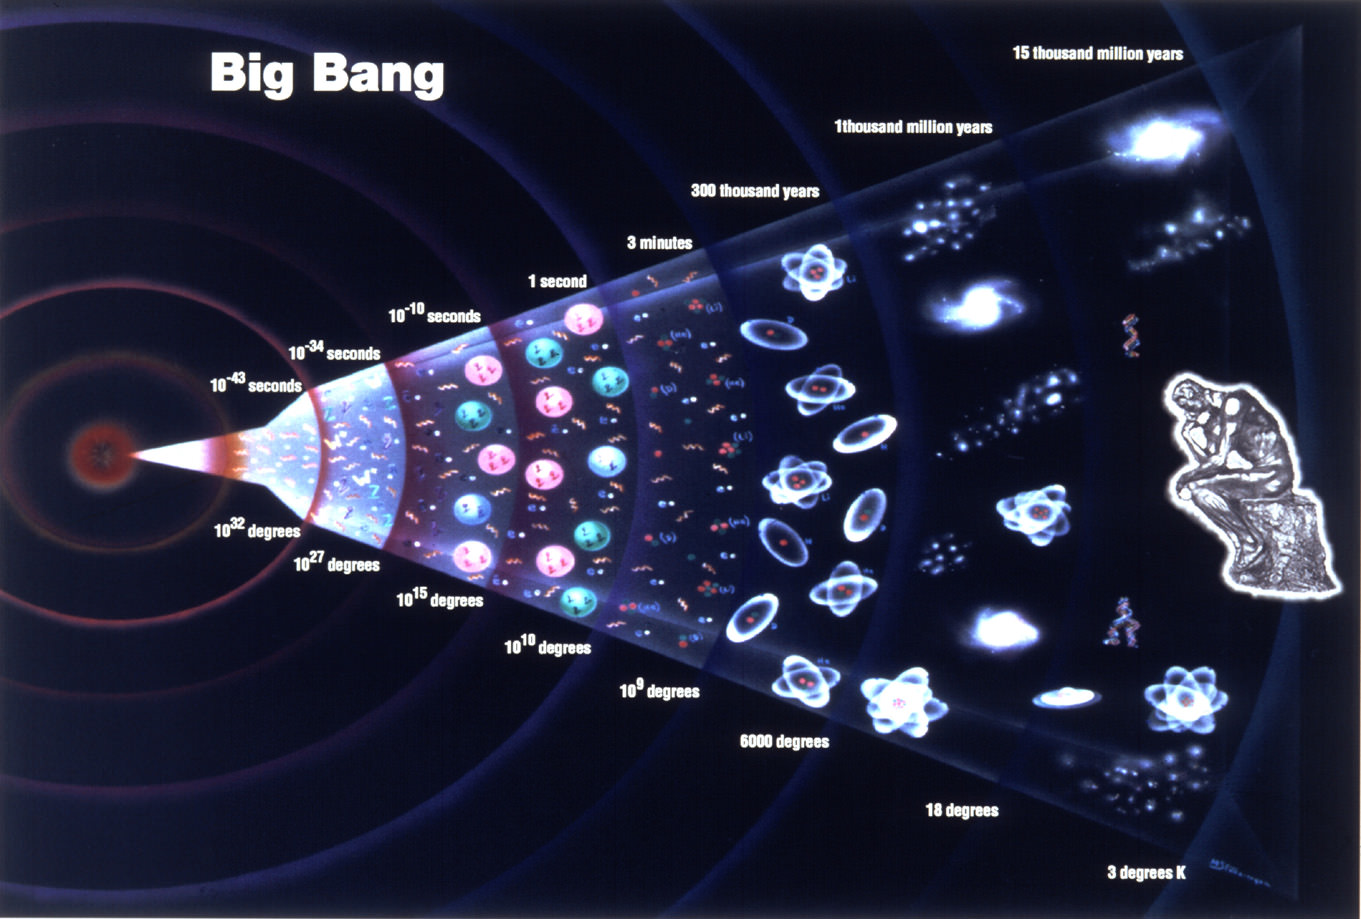 What the Big Bang theory have failed to explain